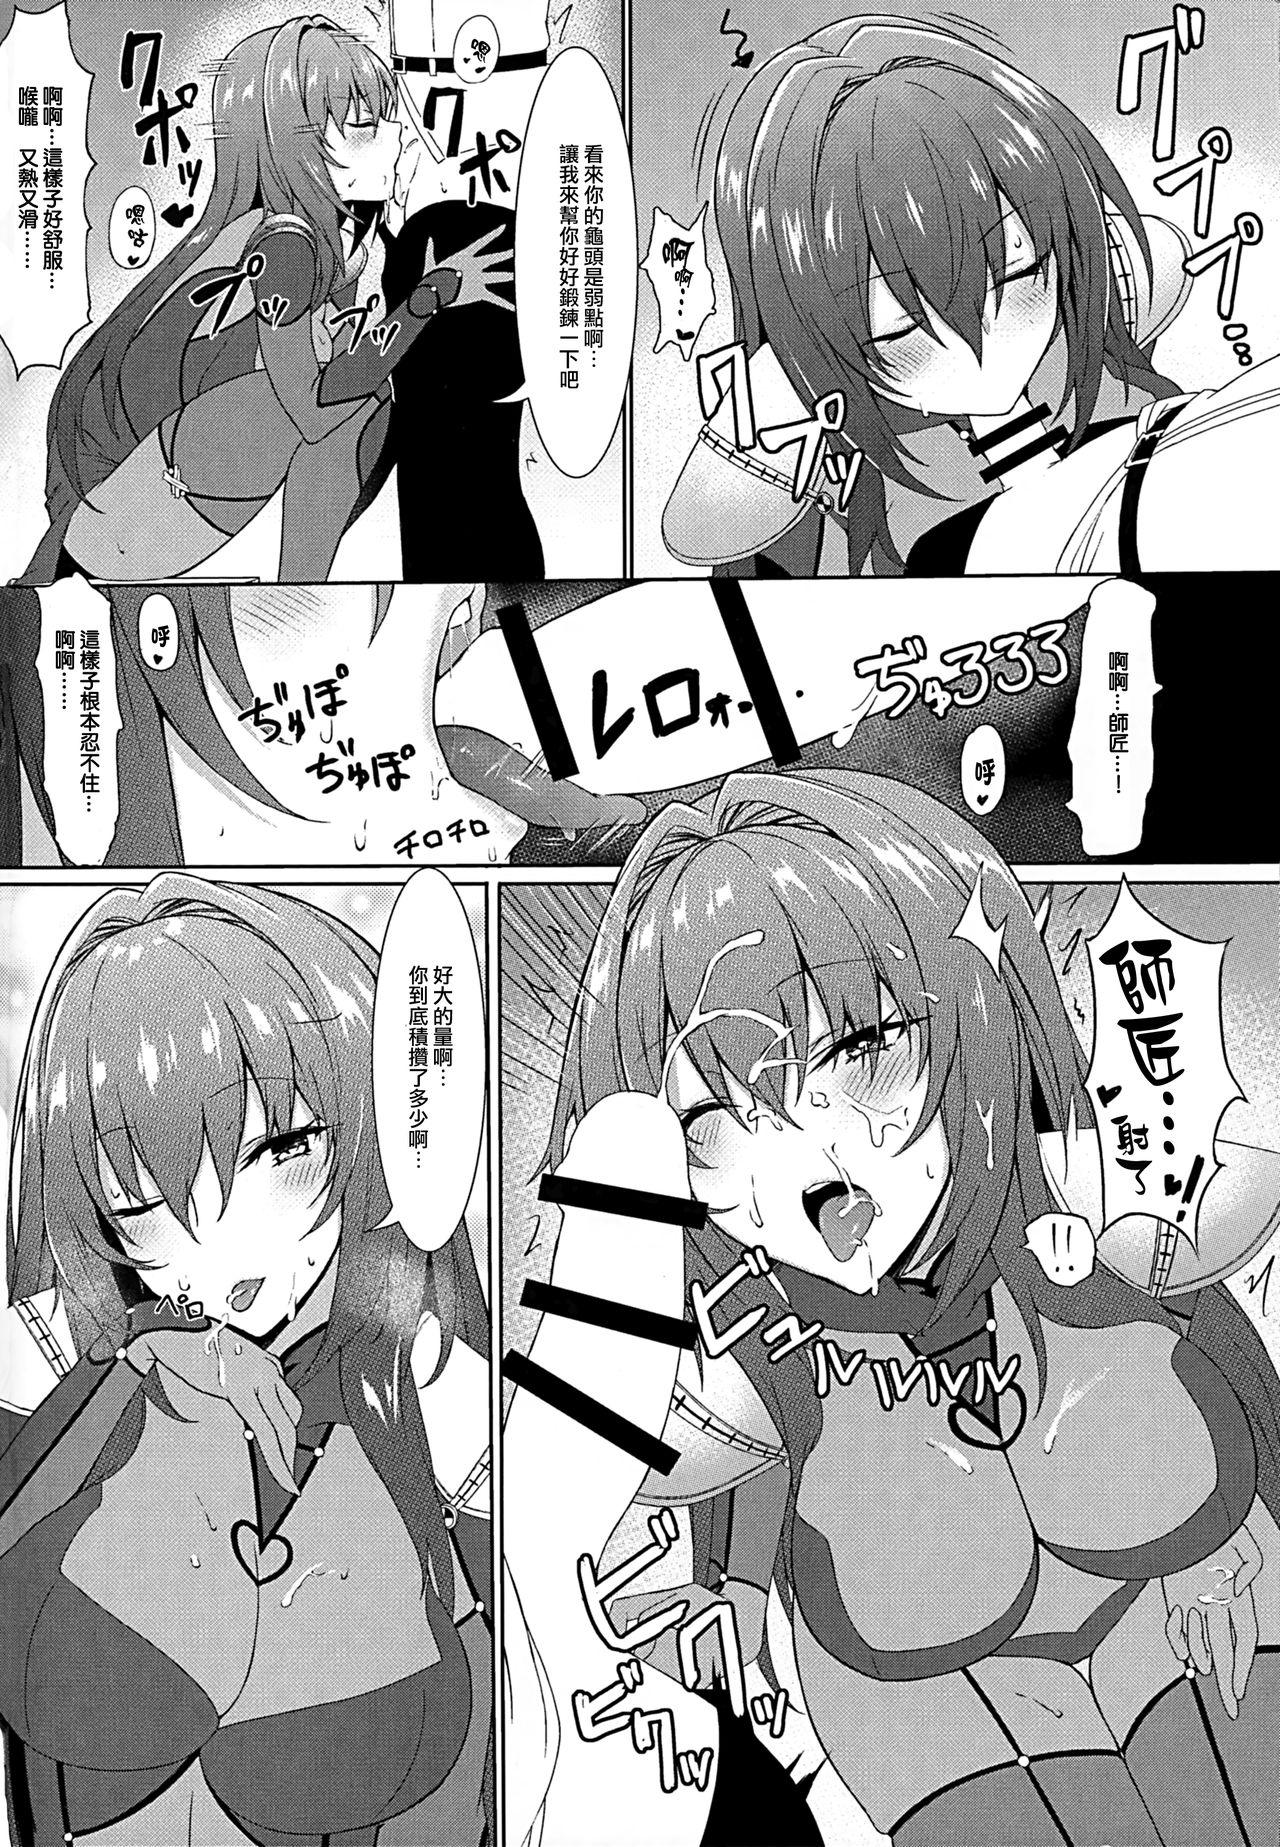 Transex Nukiuchi!! Shishou - Fate grand order Action - Page 9